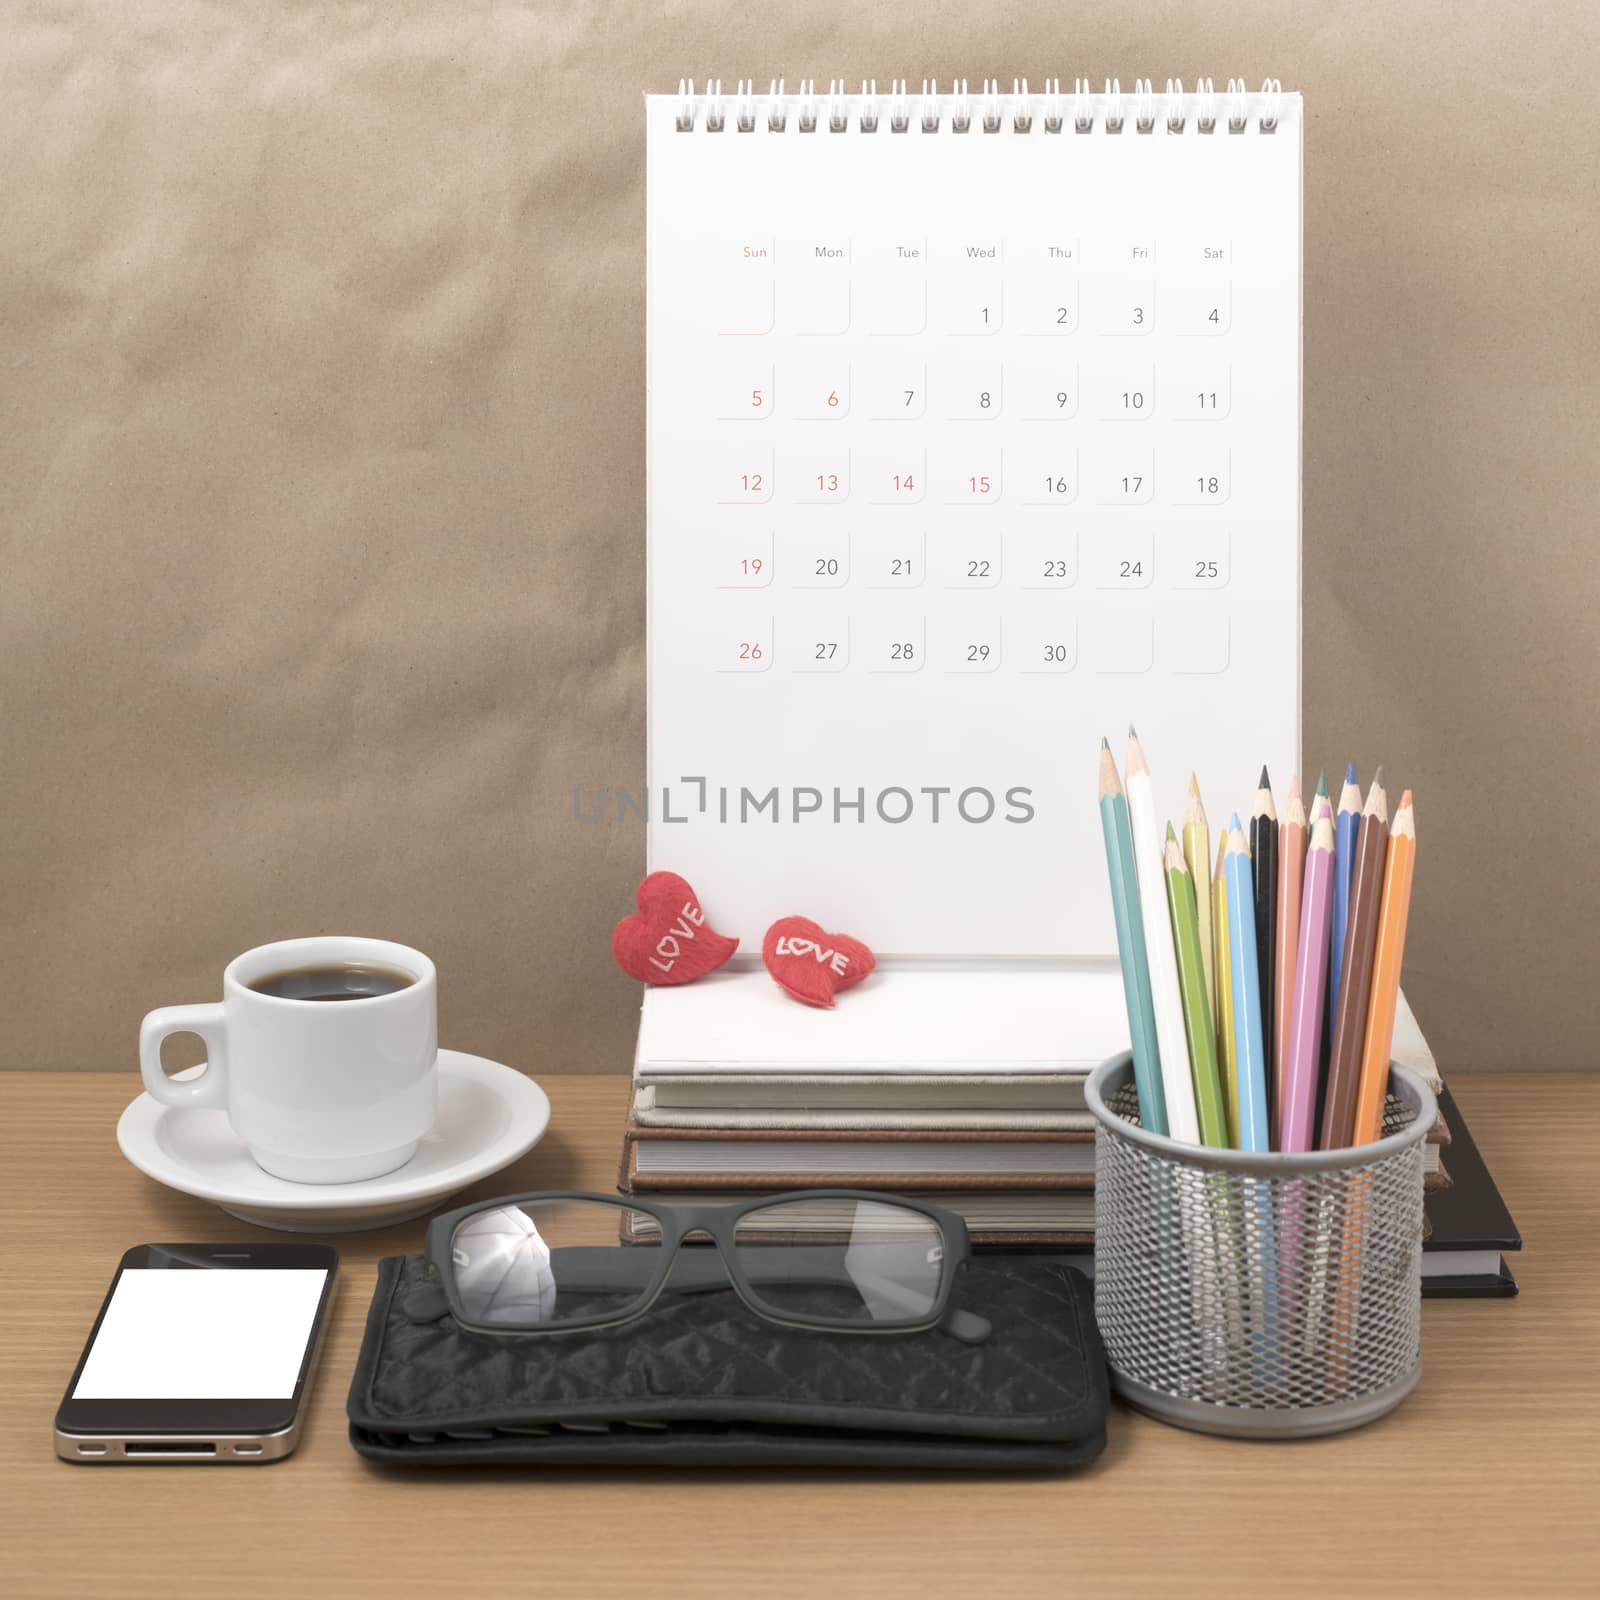 office desk : coffee with phone,wallet,calendar,color pencil box,stack of book,heart,eyeglasses on wood background